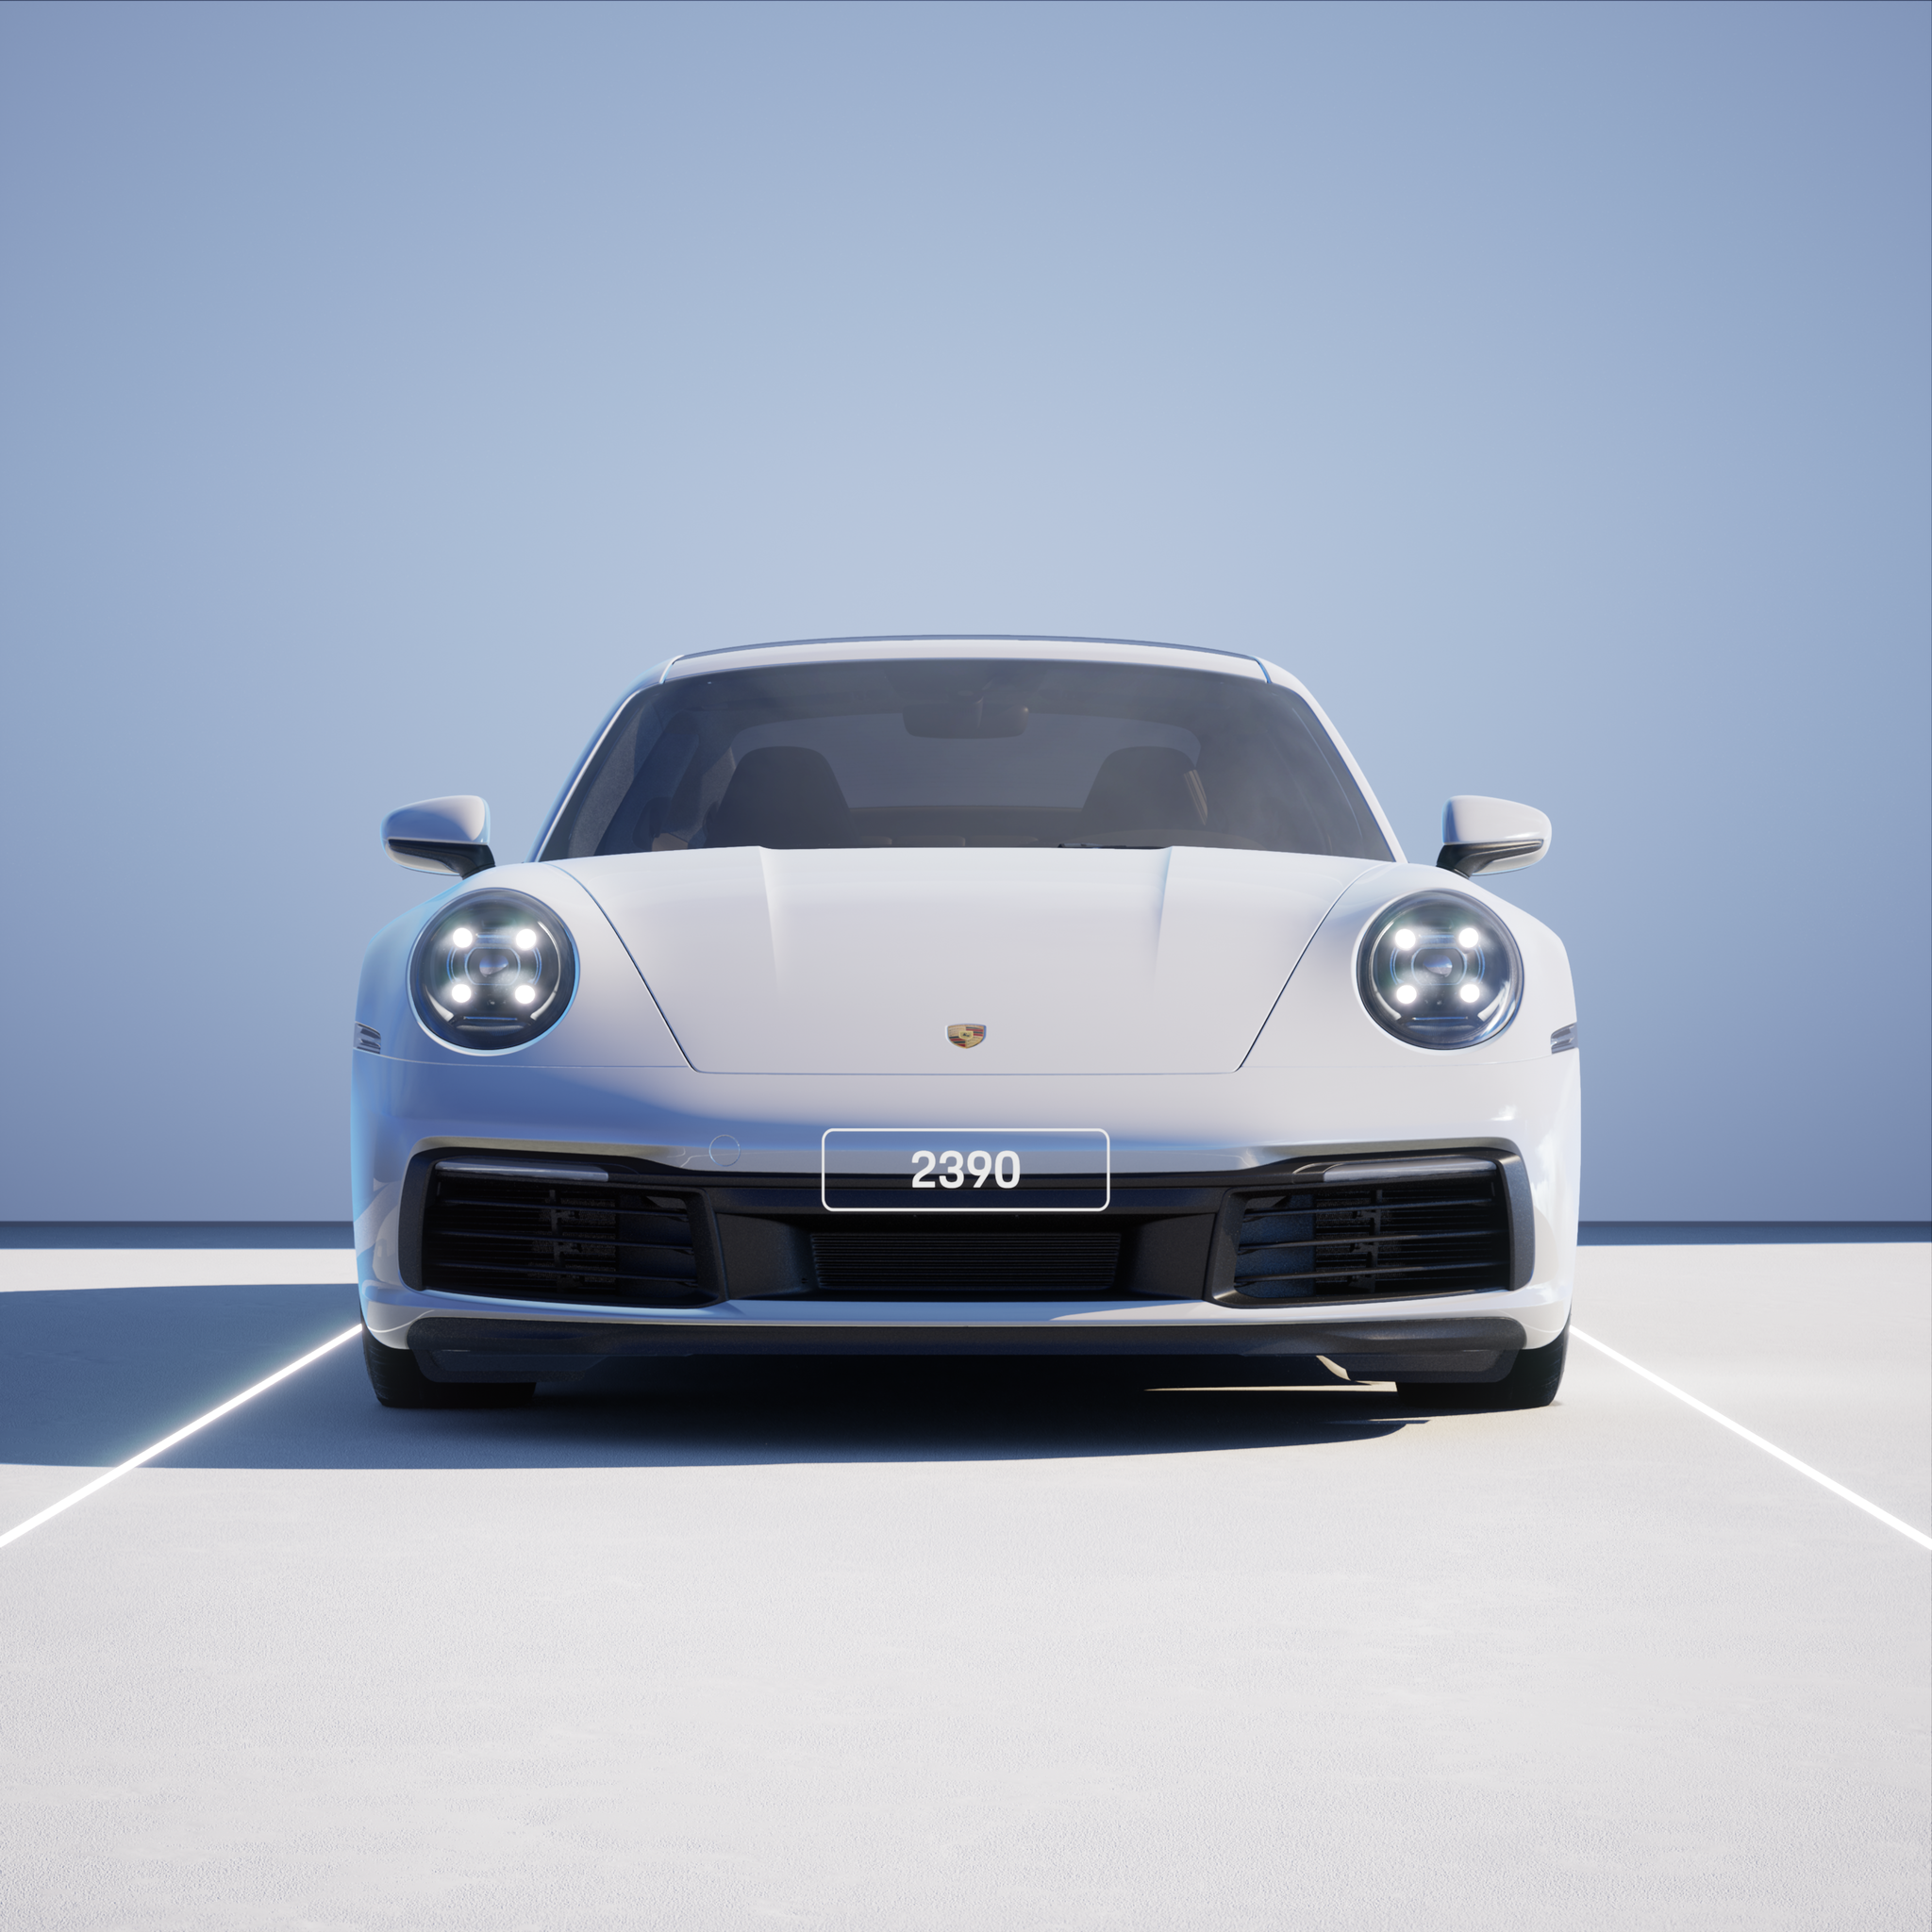 The PORSCHΞ 911 2390 image in phase